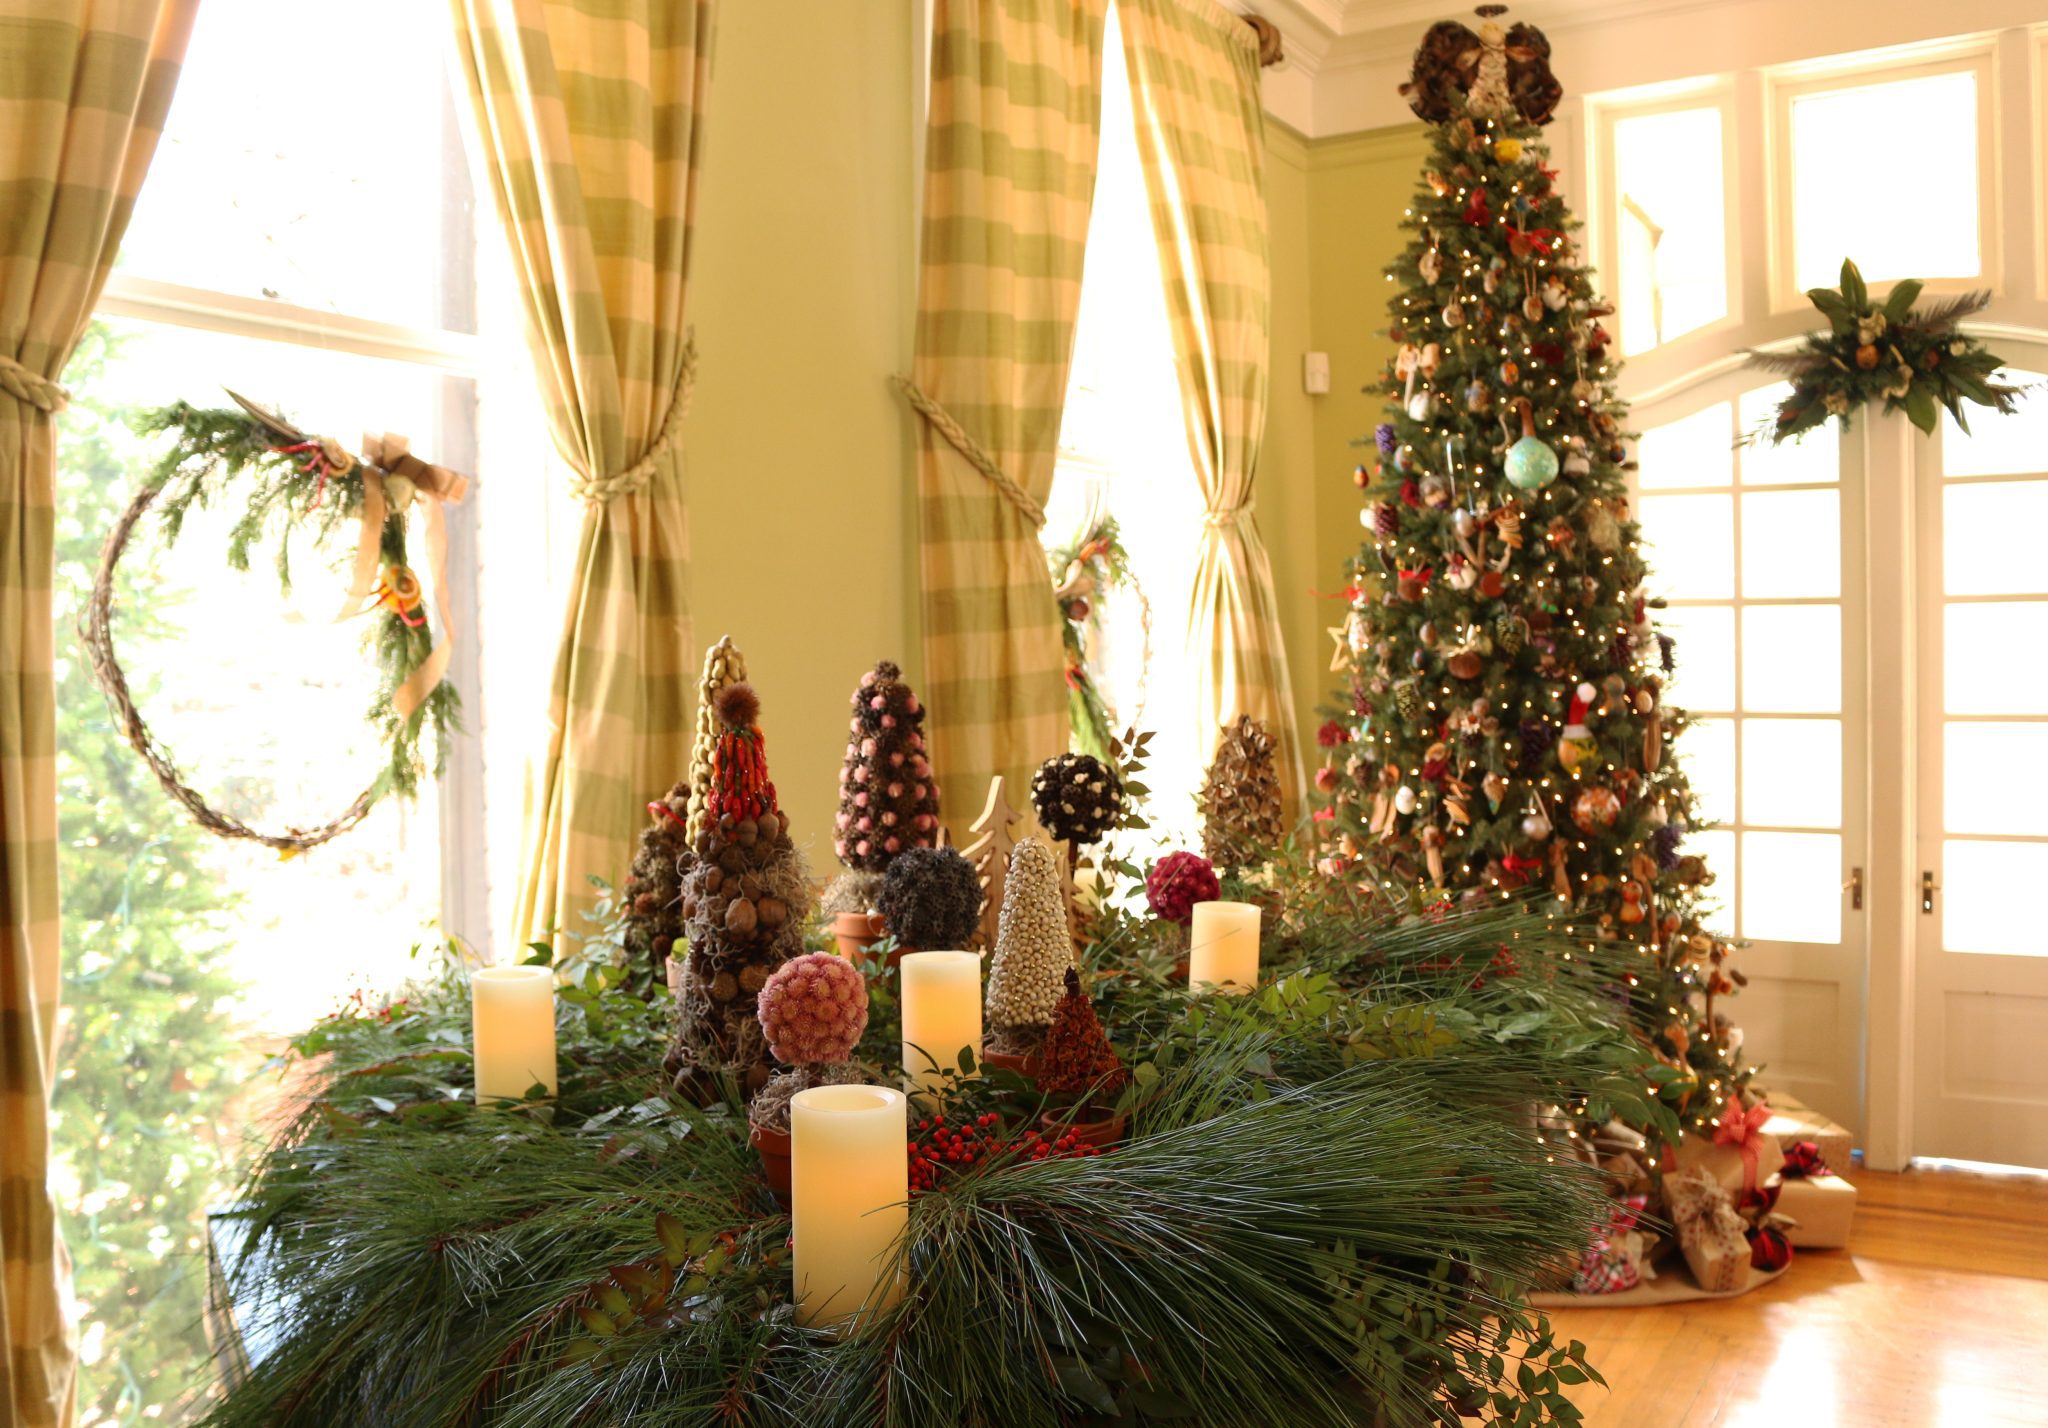 holiday decorations with outdoor materials